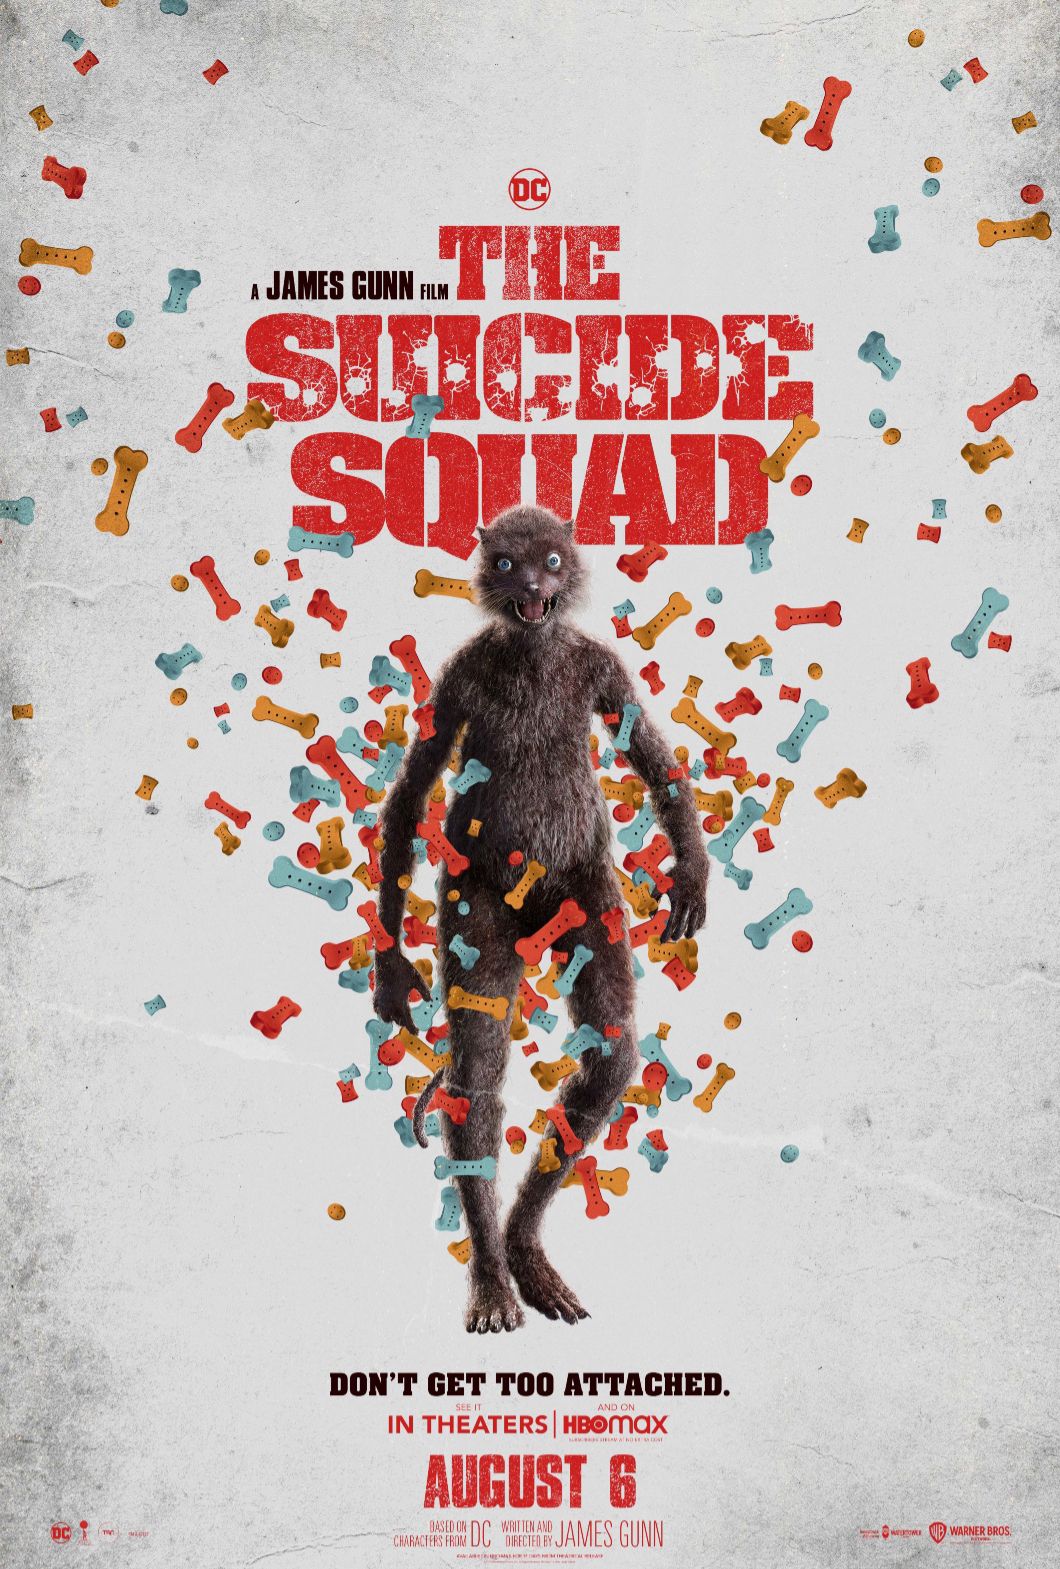 The Suicide Squad character poster #9